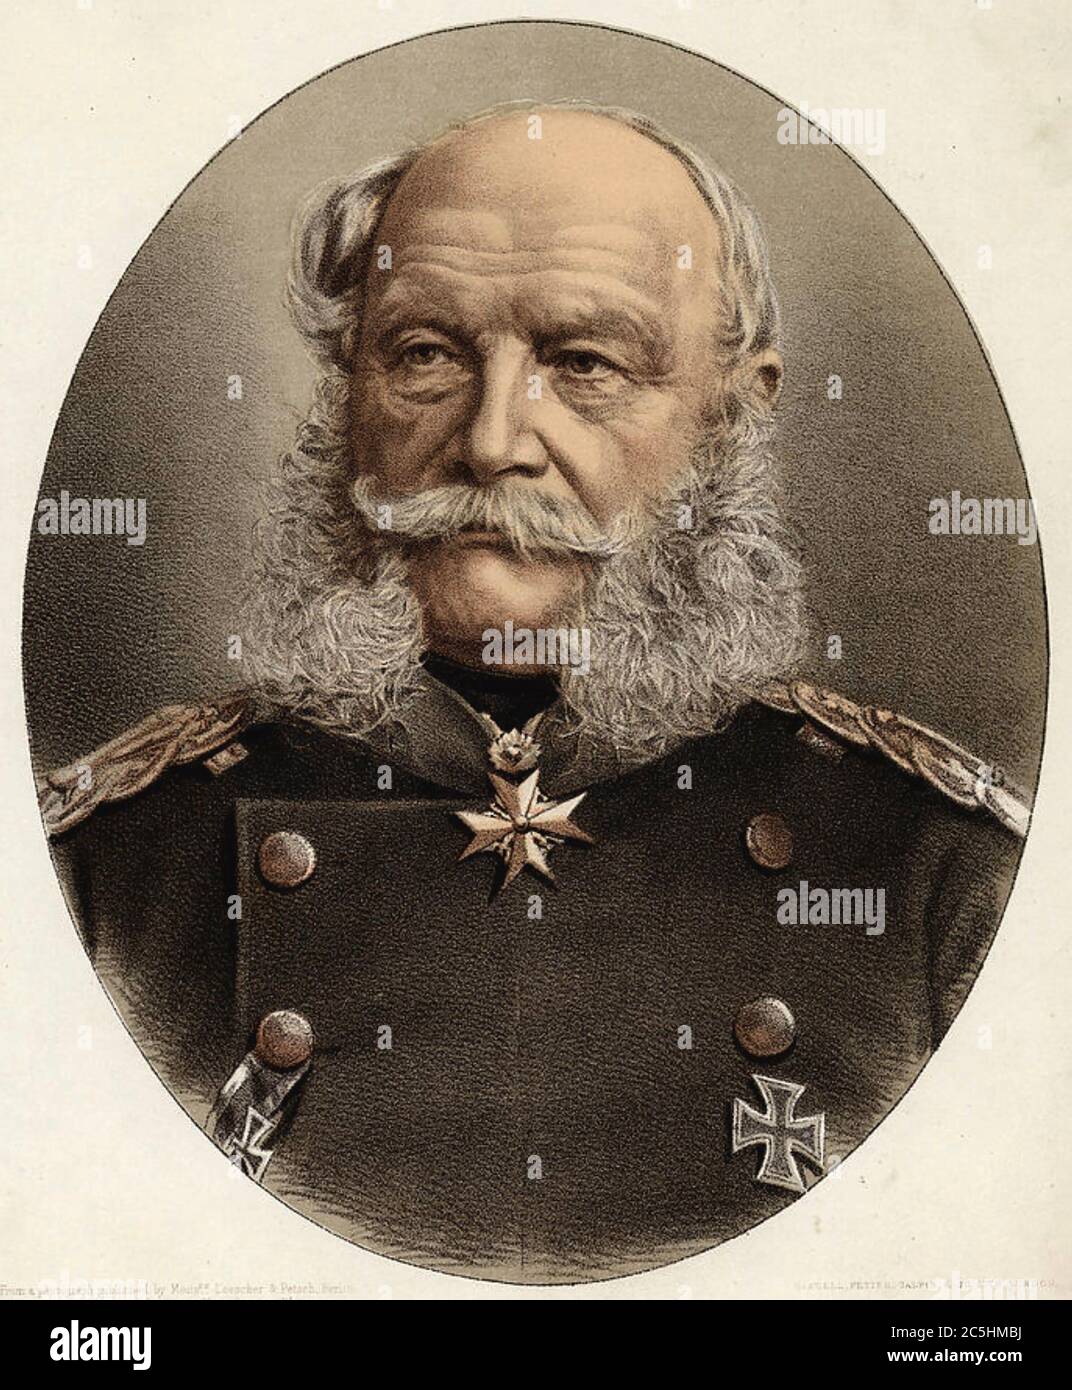 WILLIAM I, German Emperor (1707-1888) about 1884 Stock Photo